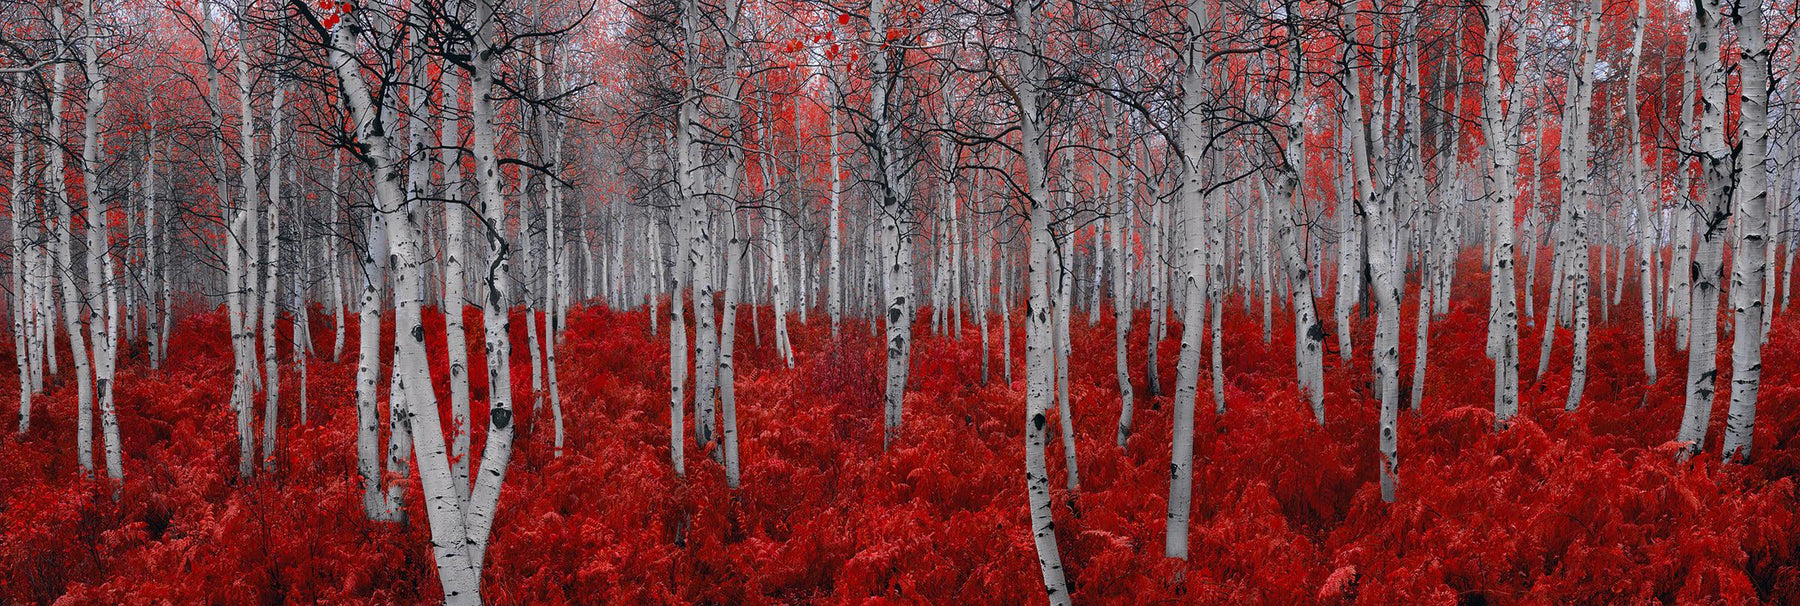 White forest of birch trees with red leaves surrounded by red plants in Deer Valley Utah